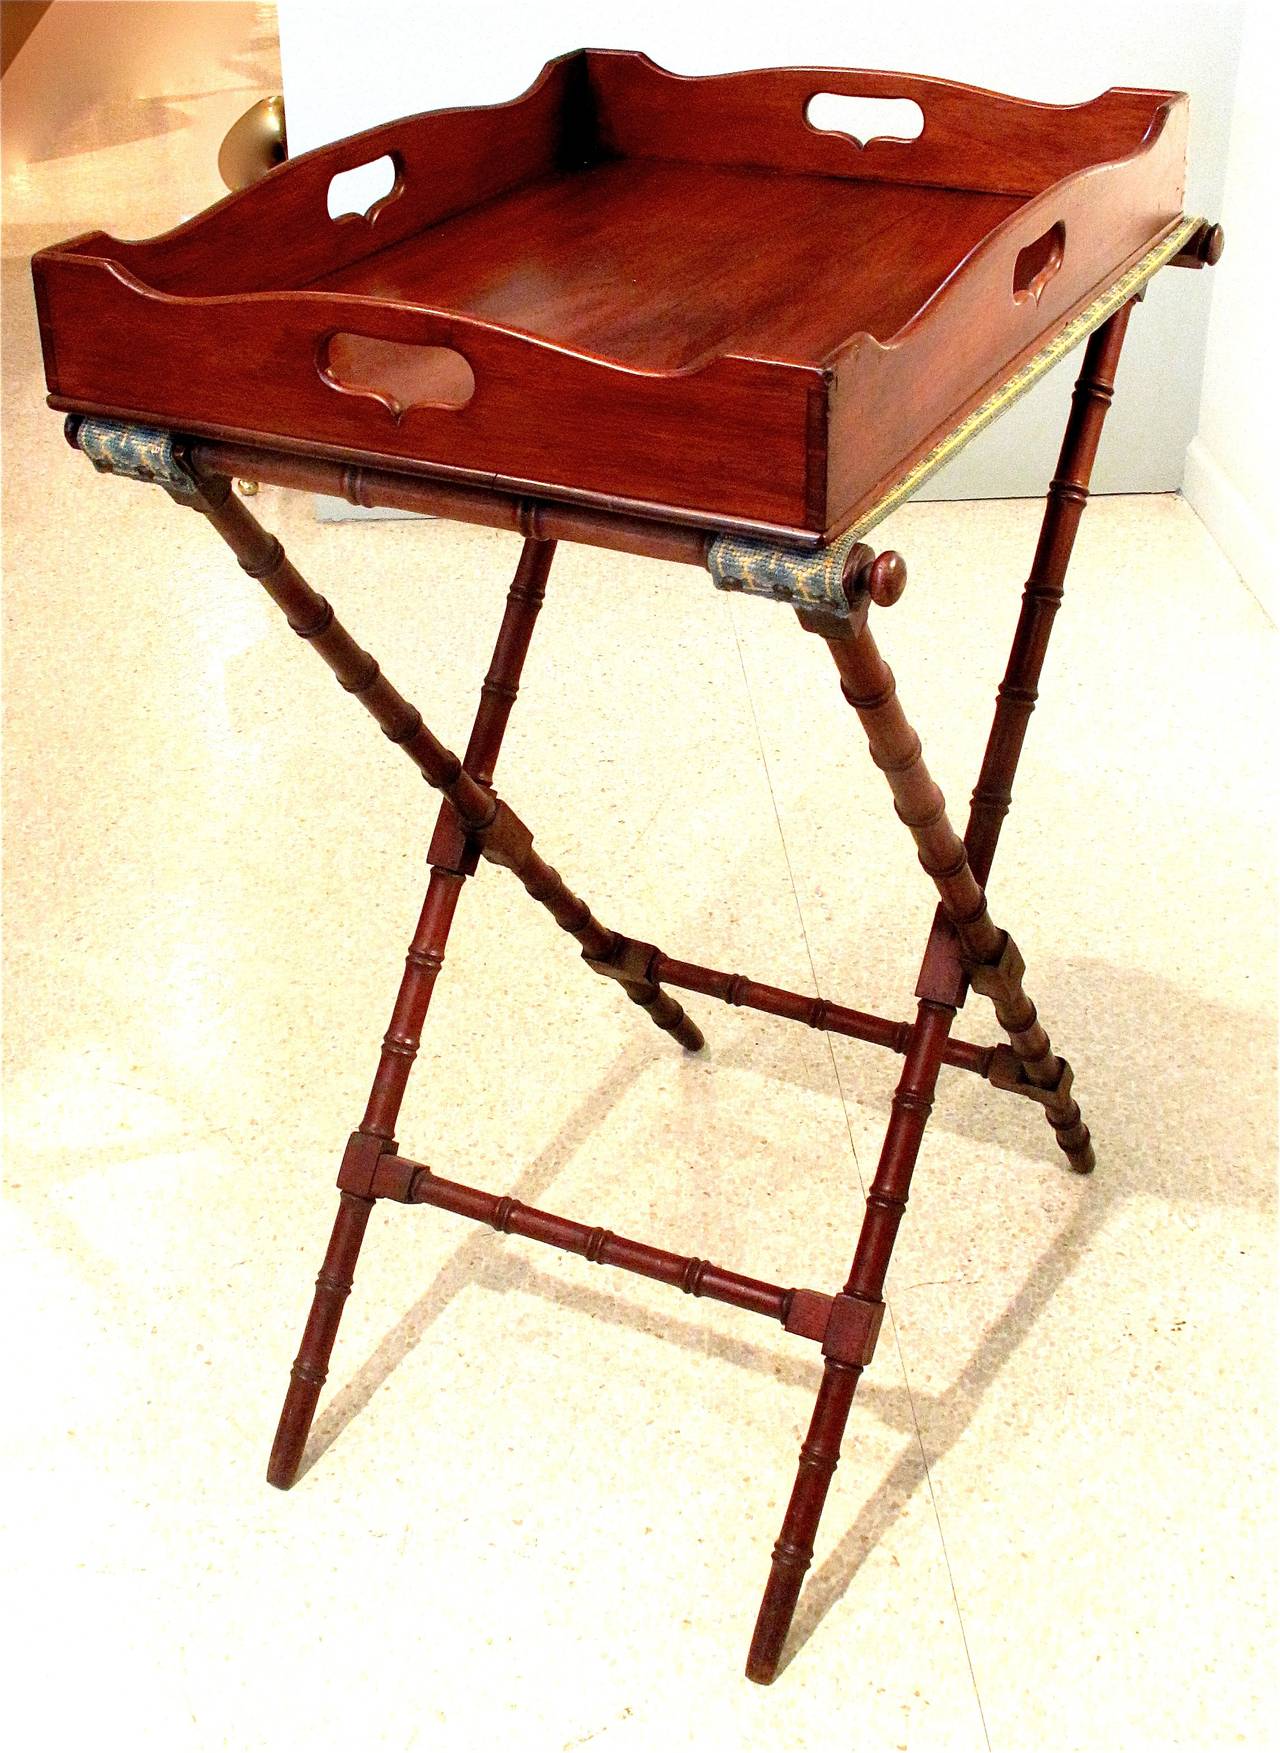 An early 19th century mahogany butler’s tray of rectangular form with a serpentine top line profile and shaped handles on all four sides, on a period bamboo turned legged folding stand. Needlepoint tray supports.
Tray alone H: 3 1/2 W: 24 D: 18